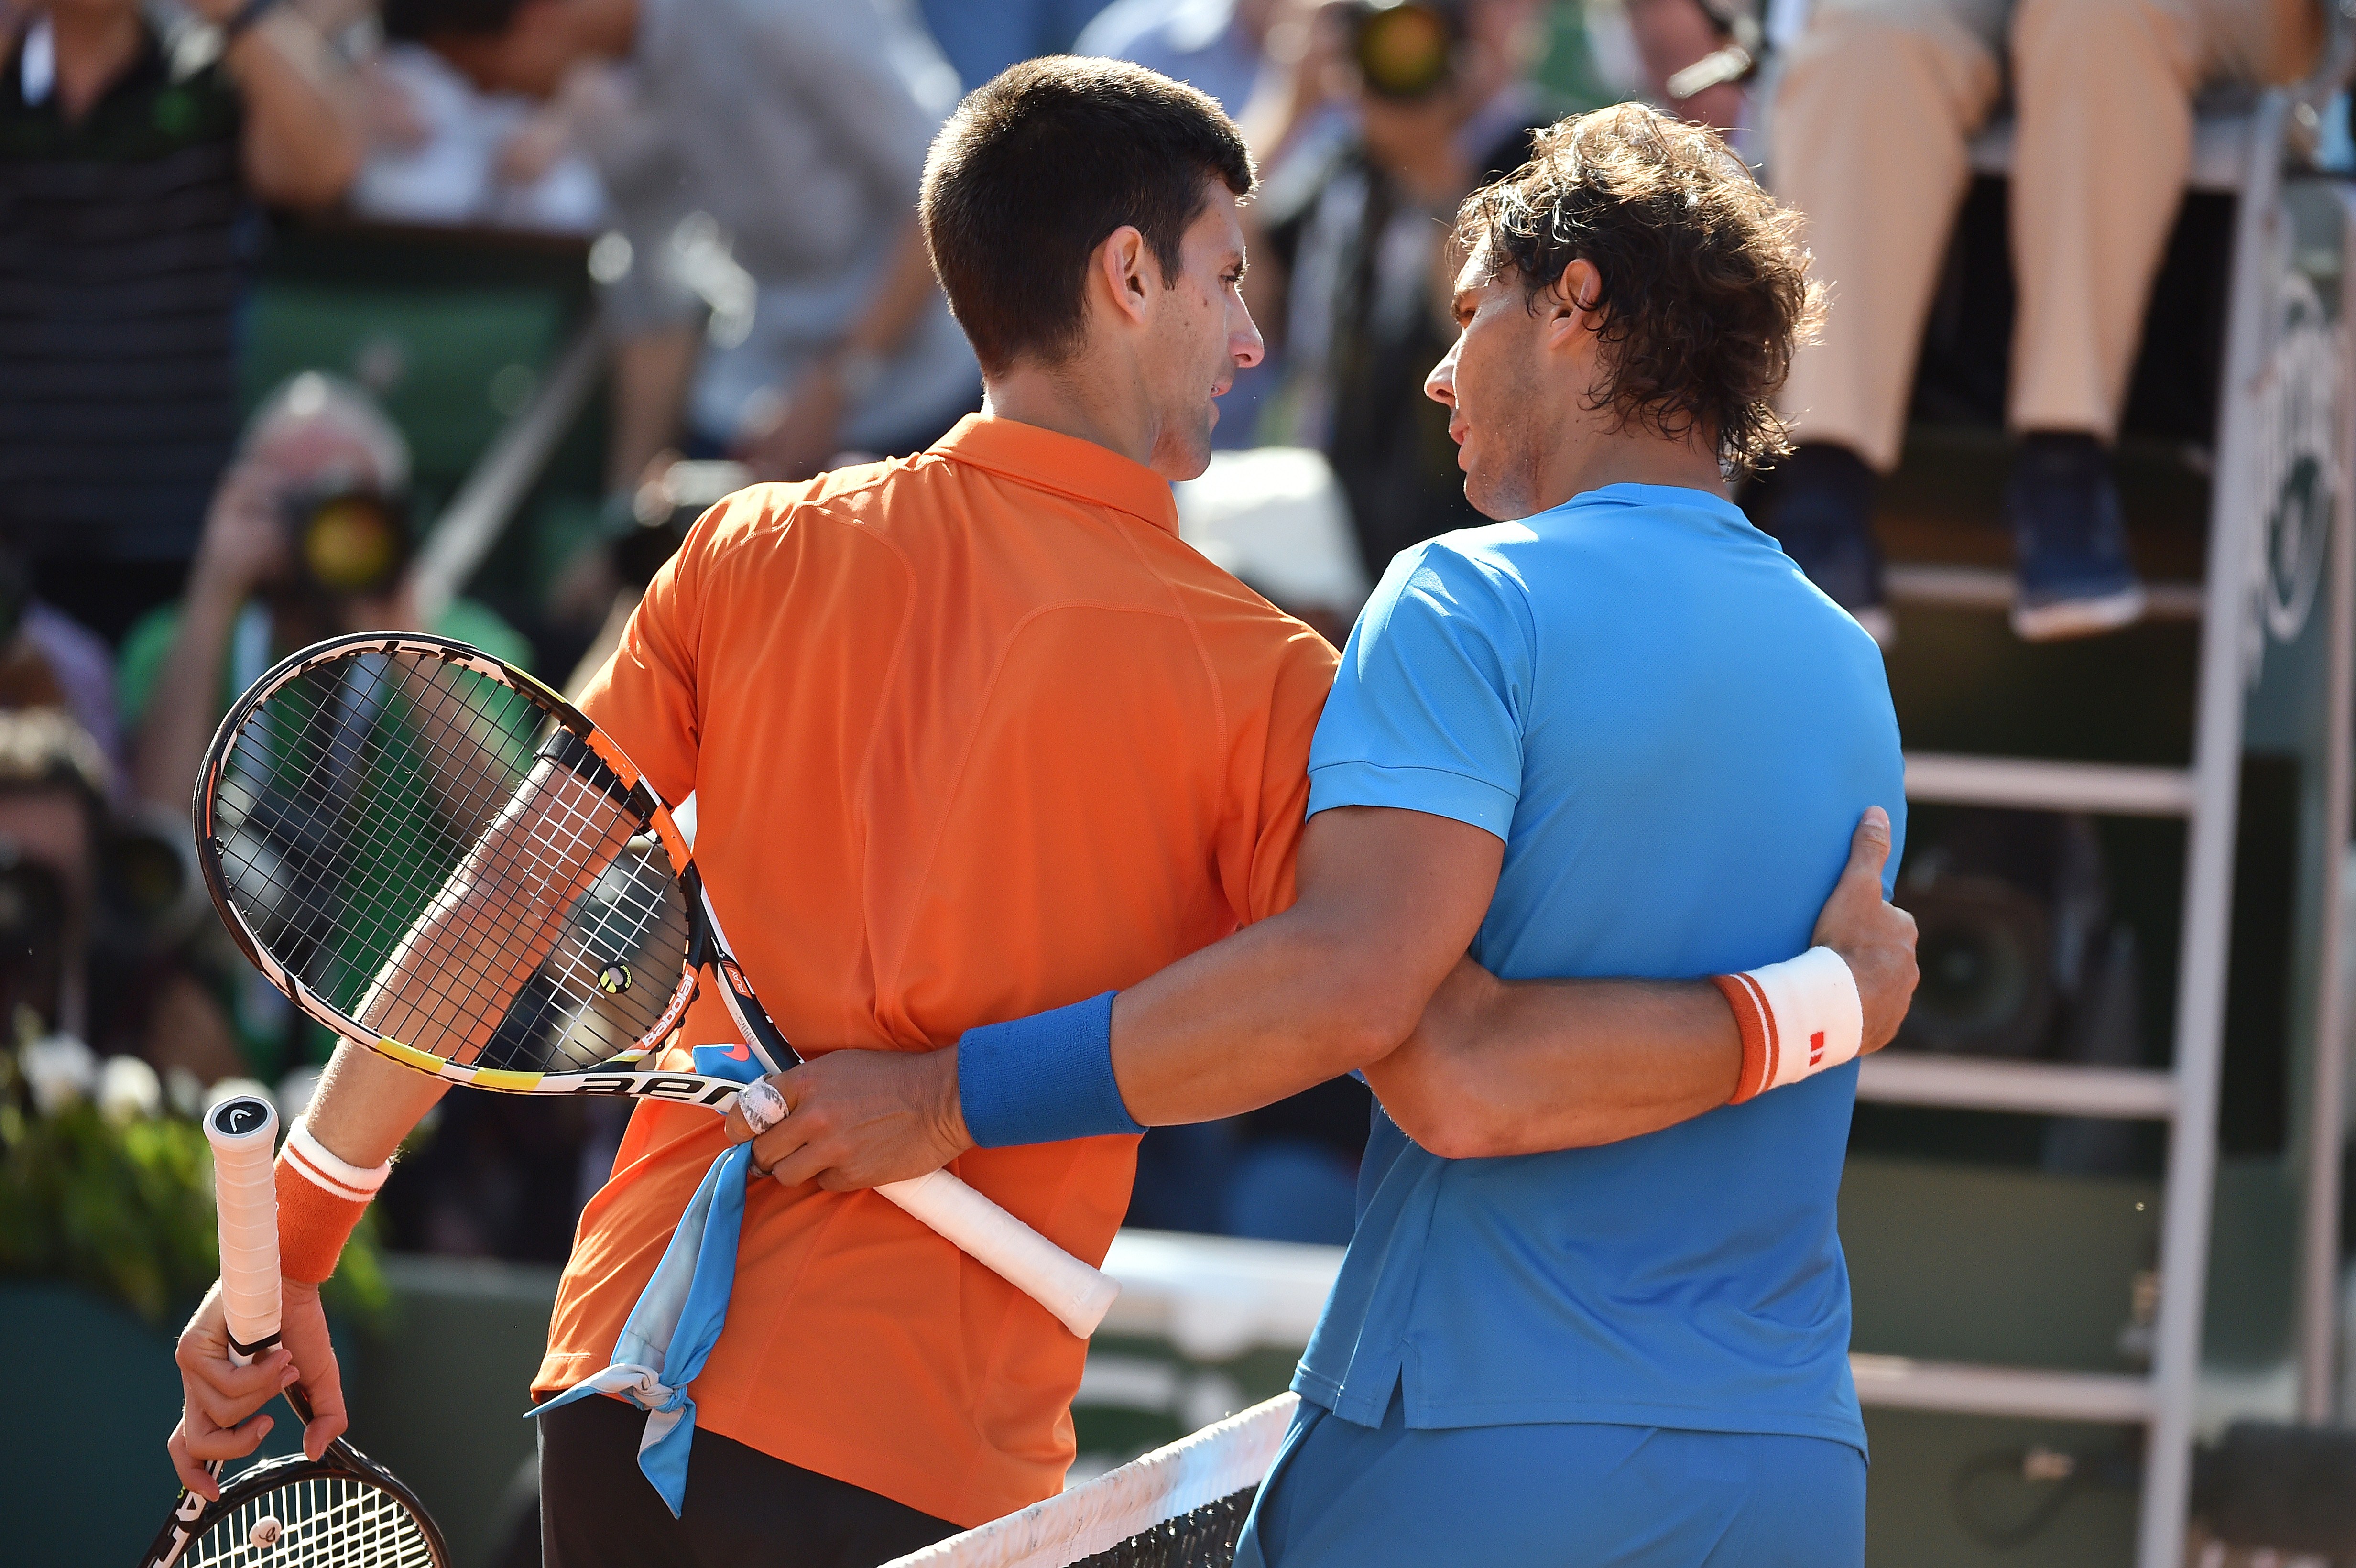 10 things to know about the upcoming clash between Novak Djokovic and Rafael Nadal at Roland Garros